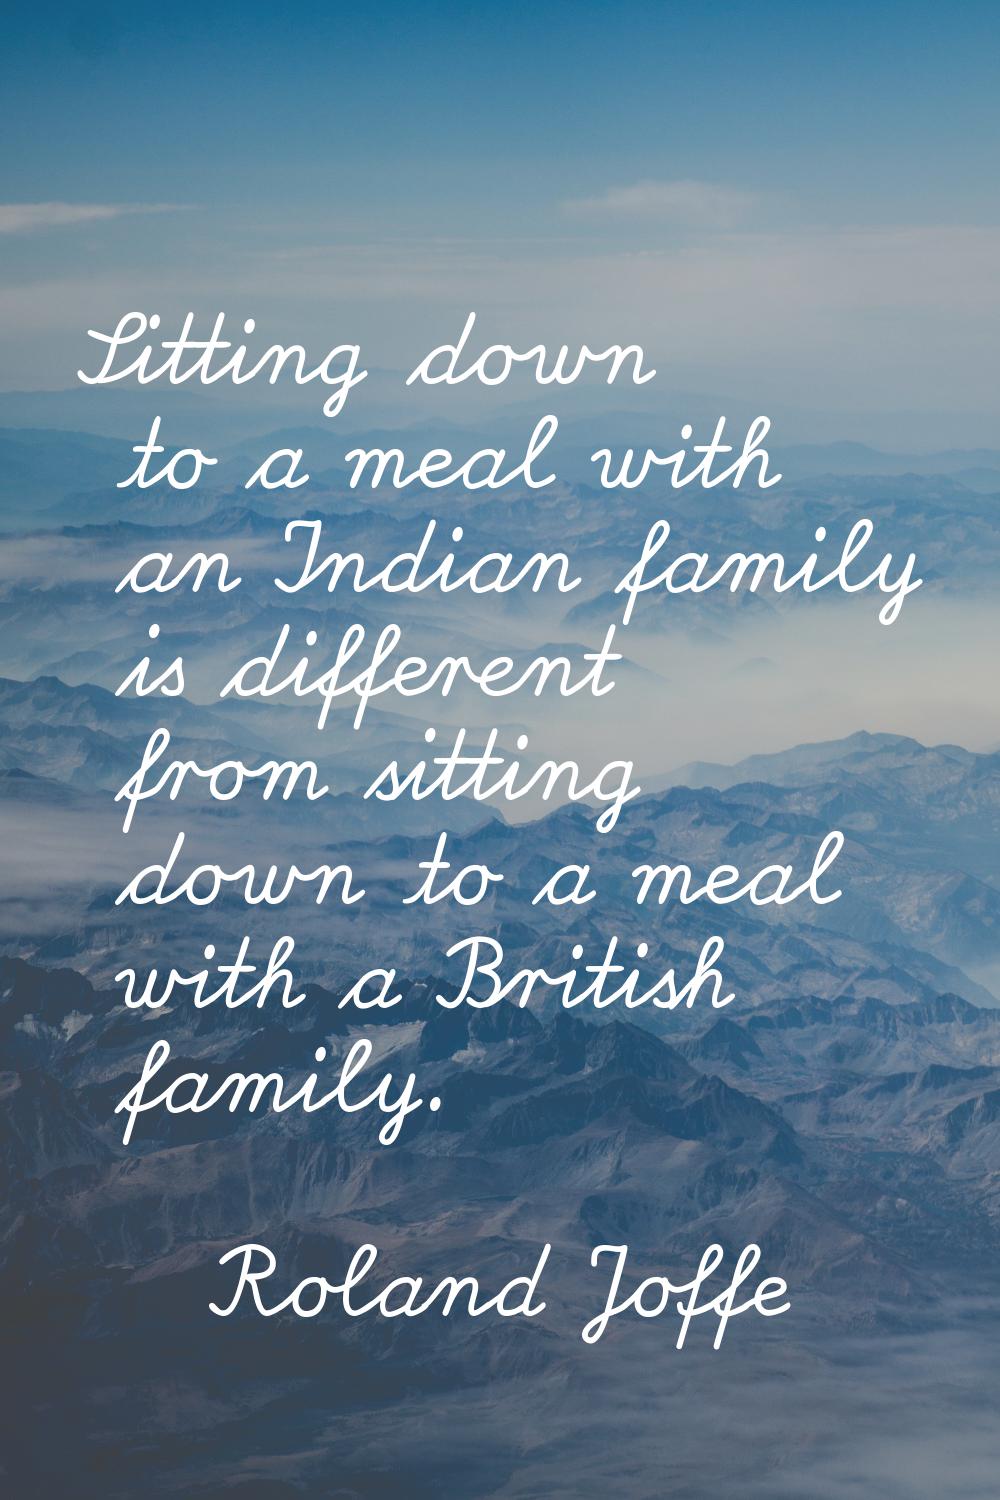 Sitting down to a meal with an Indian family is different from sitting down to a meal with a Britis